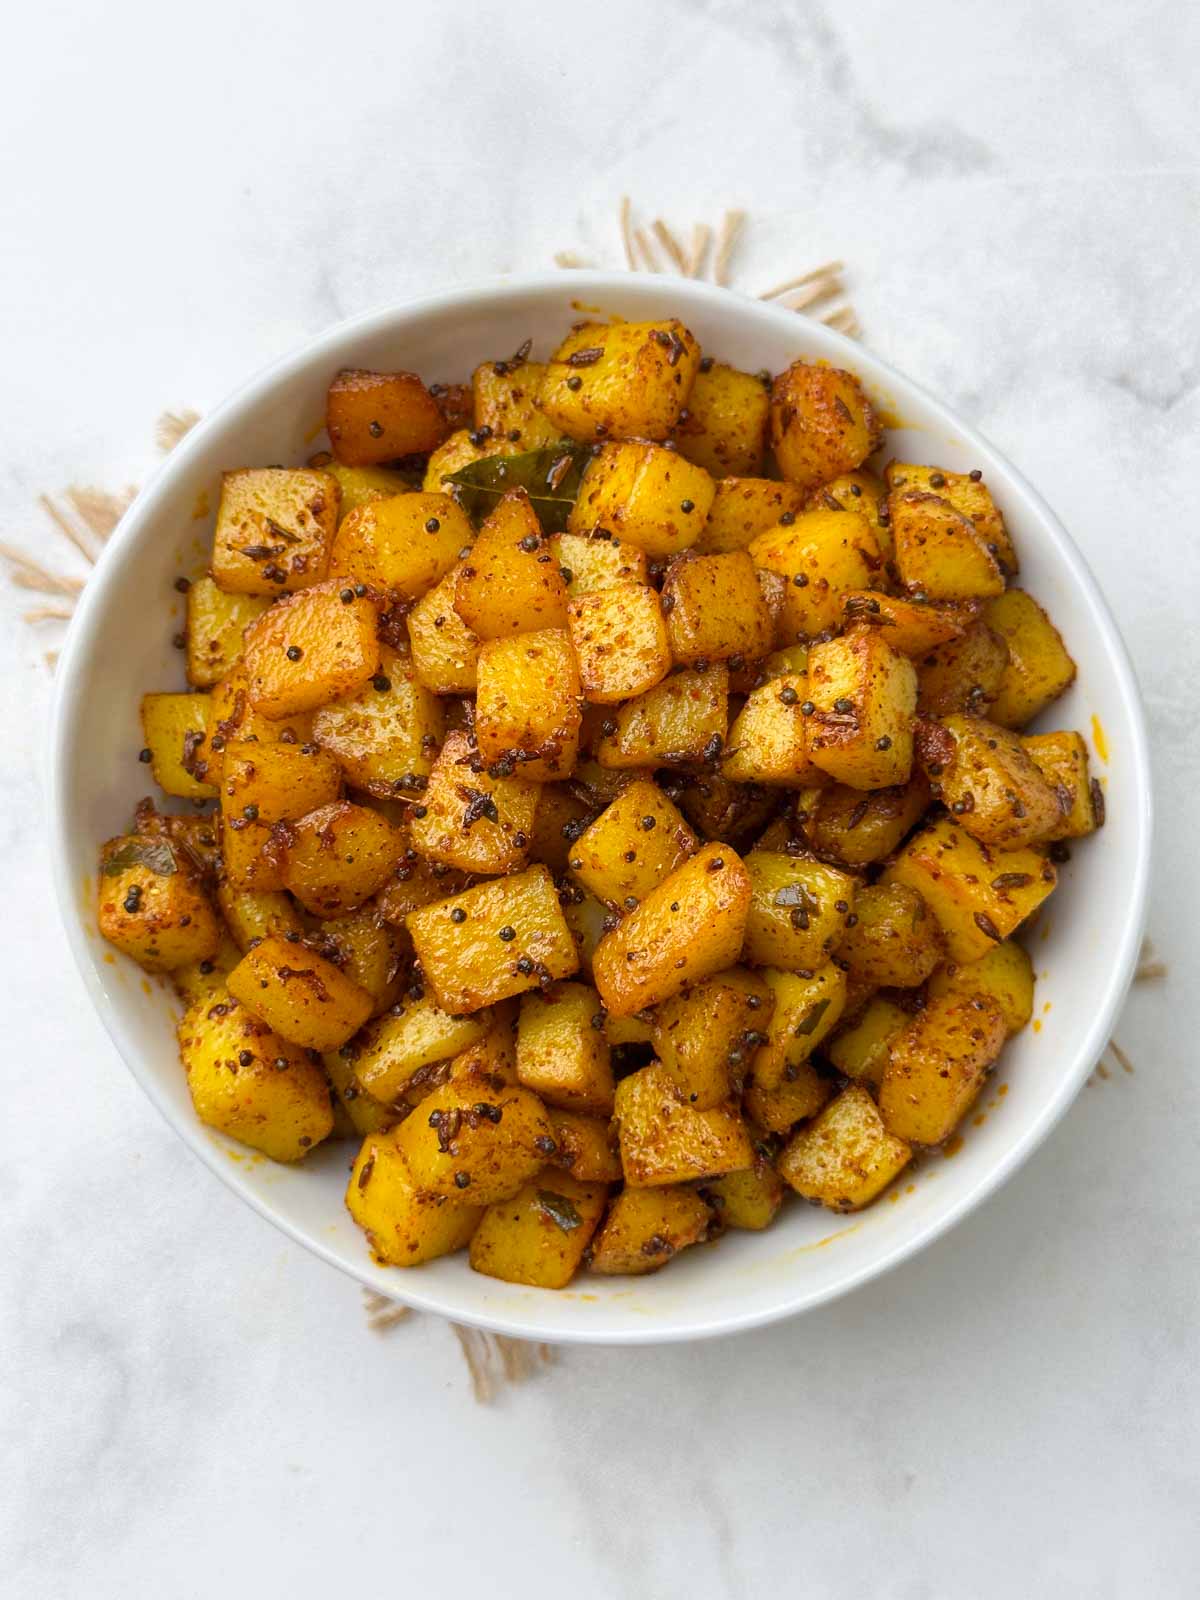 potato (aloo) fry recipe served in a bowl